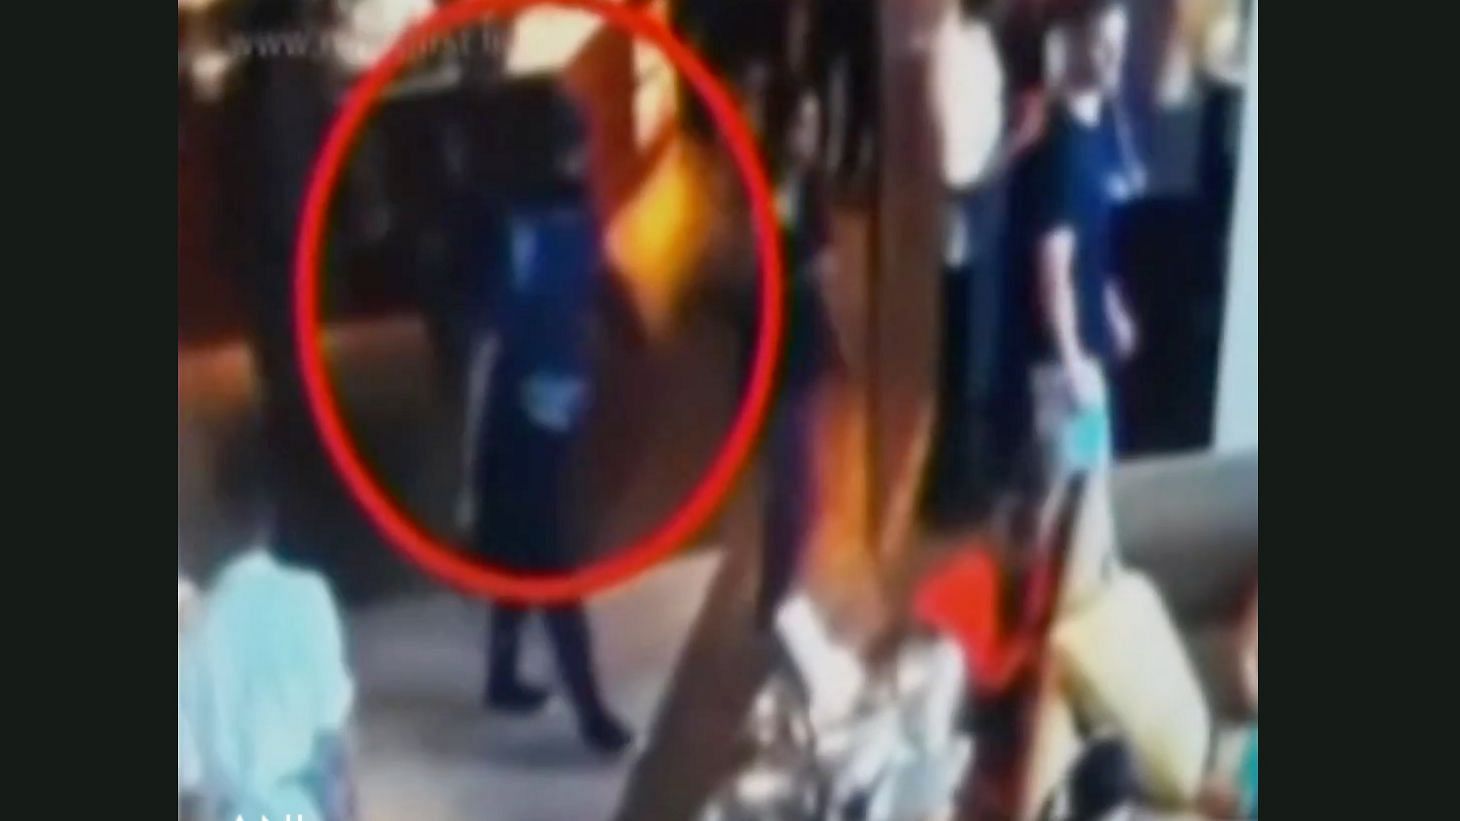 The footage is from Shangri La hotel that was one of the three hotels targeted in Sri Lanka on Easter Sunday. &nbsp;